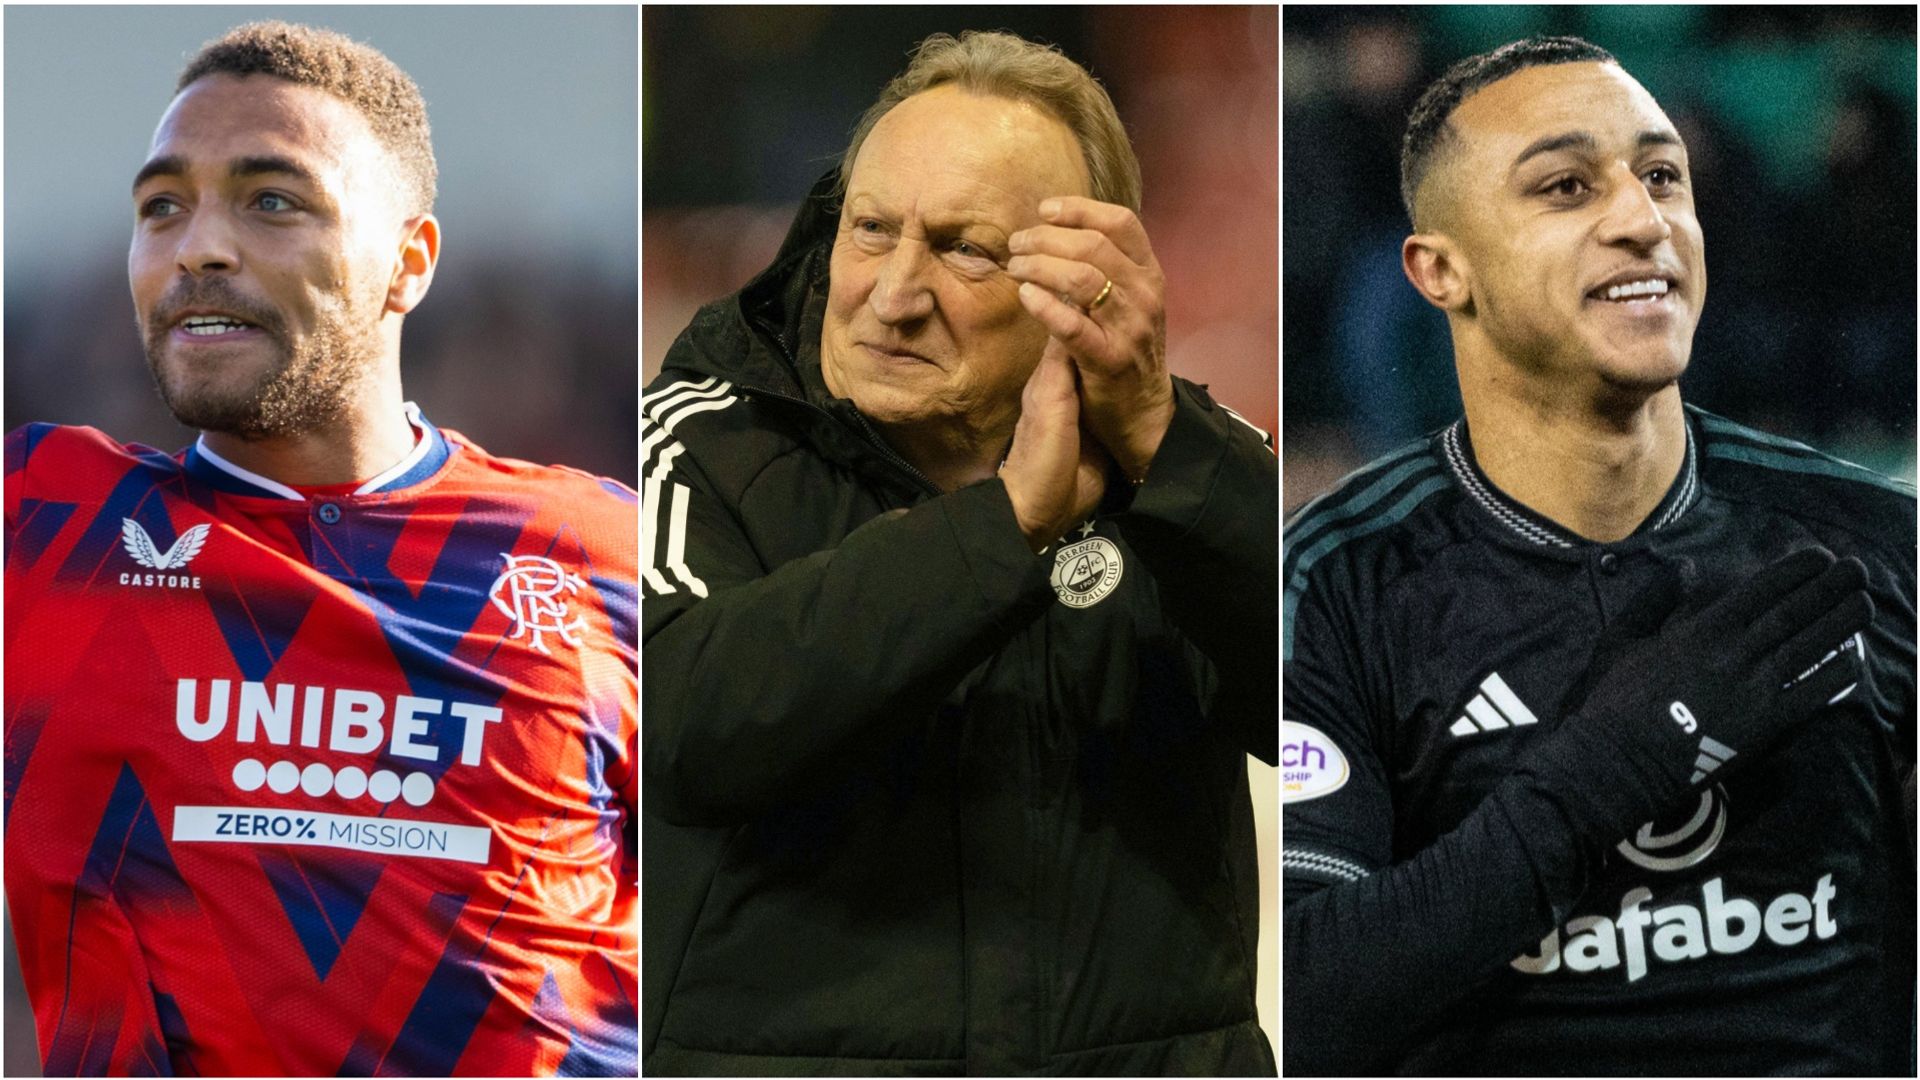 Can Rangers overtake Celtic? Warnock seeks first win - Premiership preview